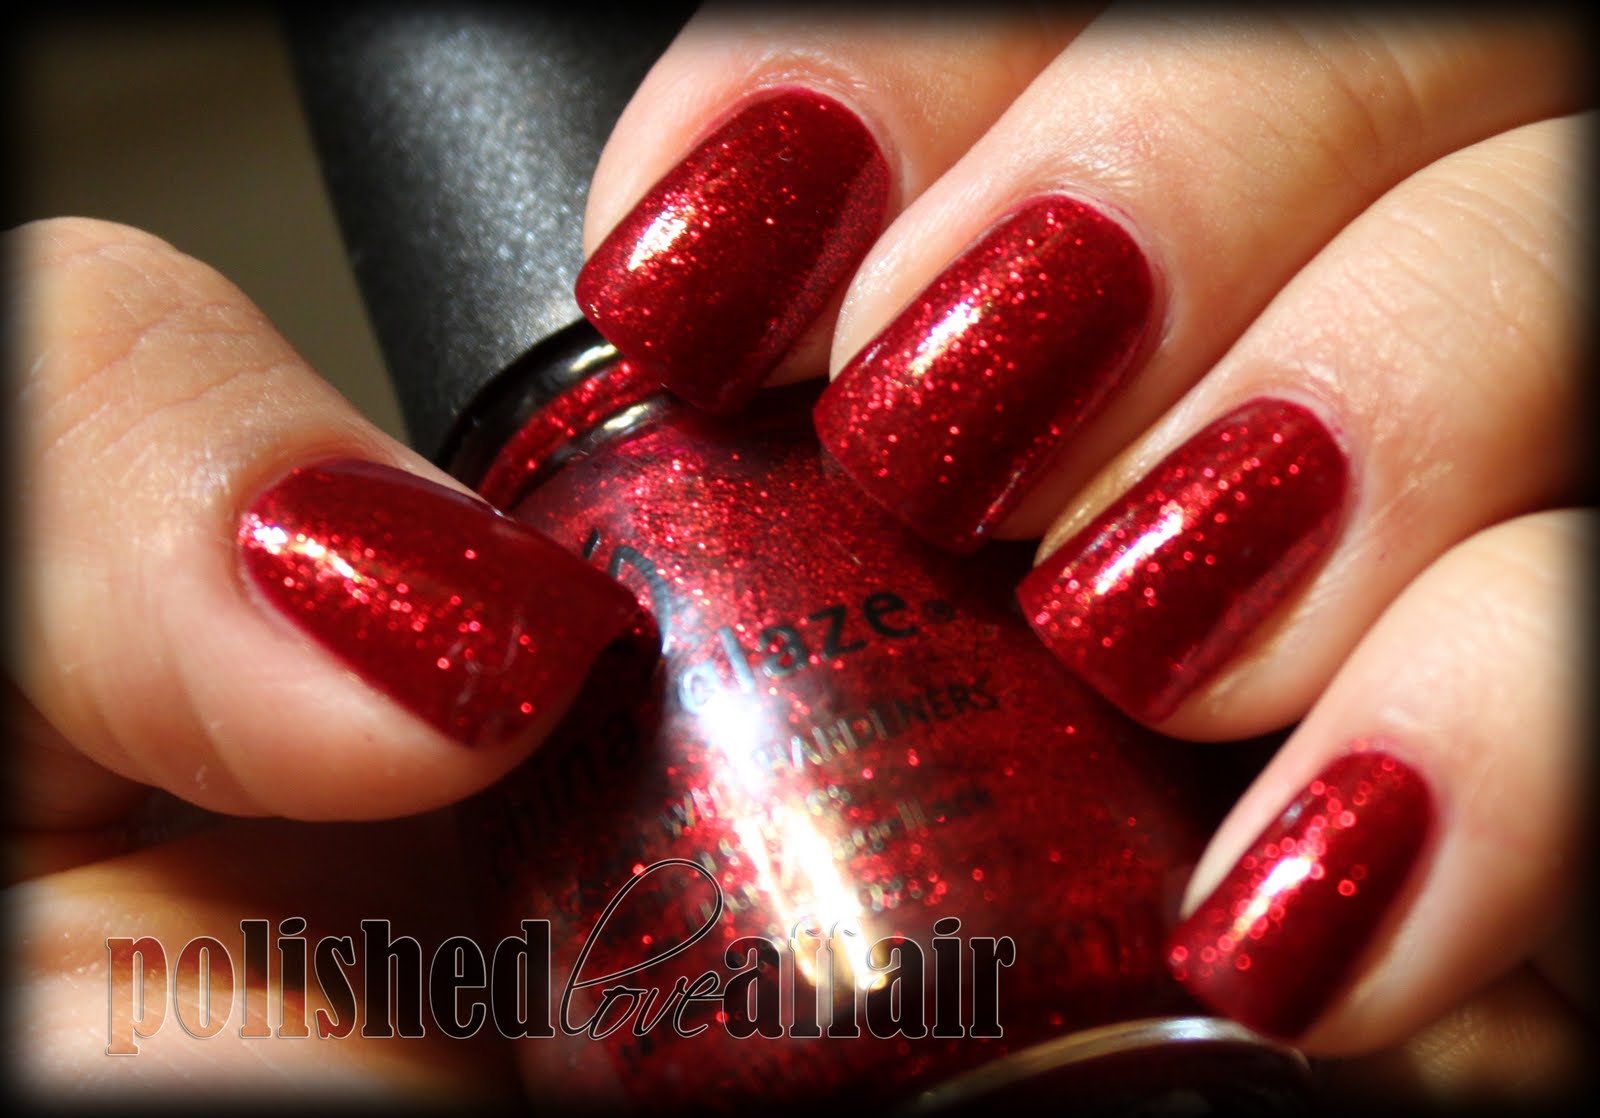 6. China Glaze Nail Lacquer in "Ruby Pumps" - wide 8